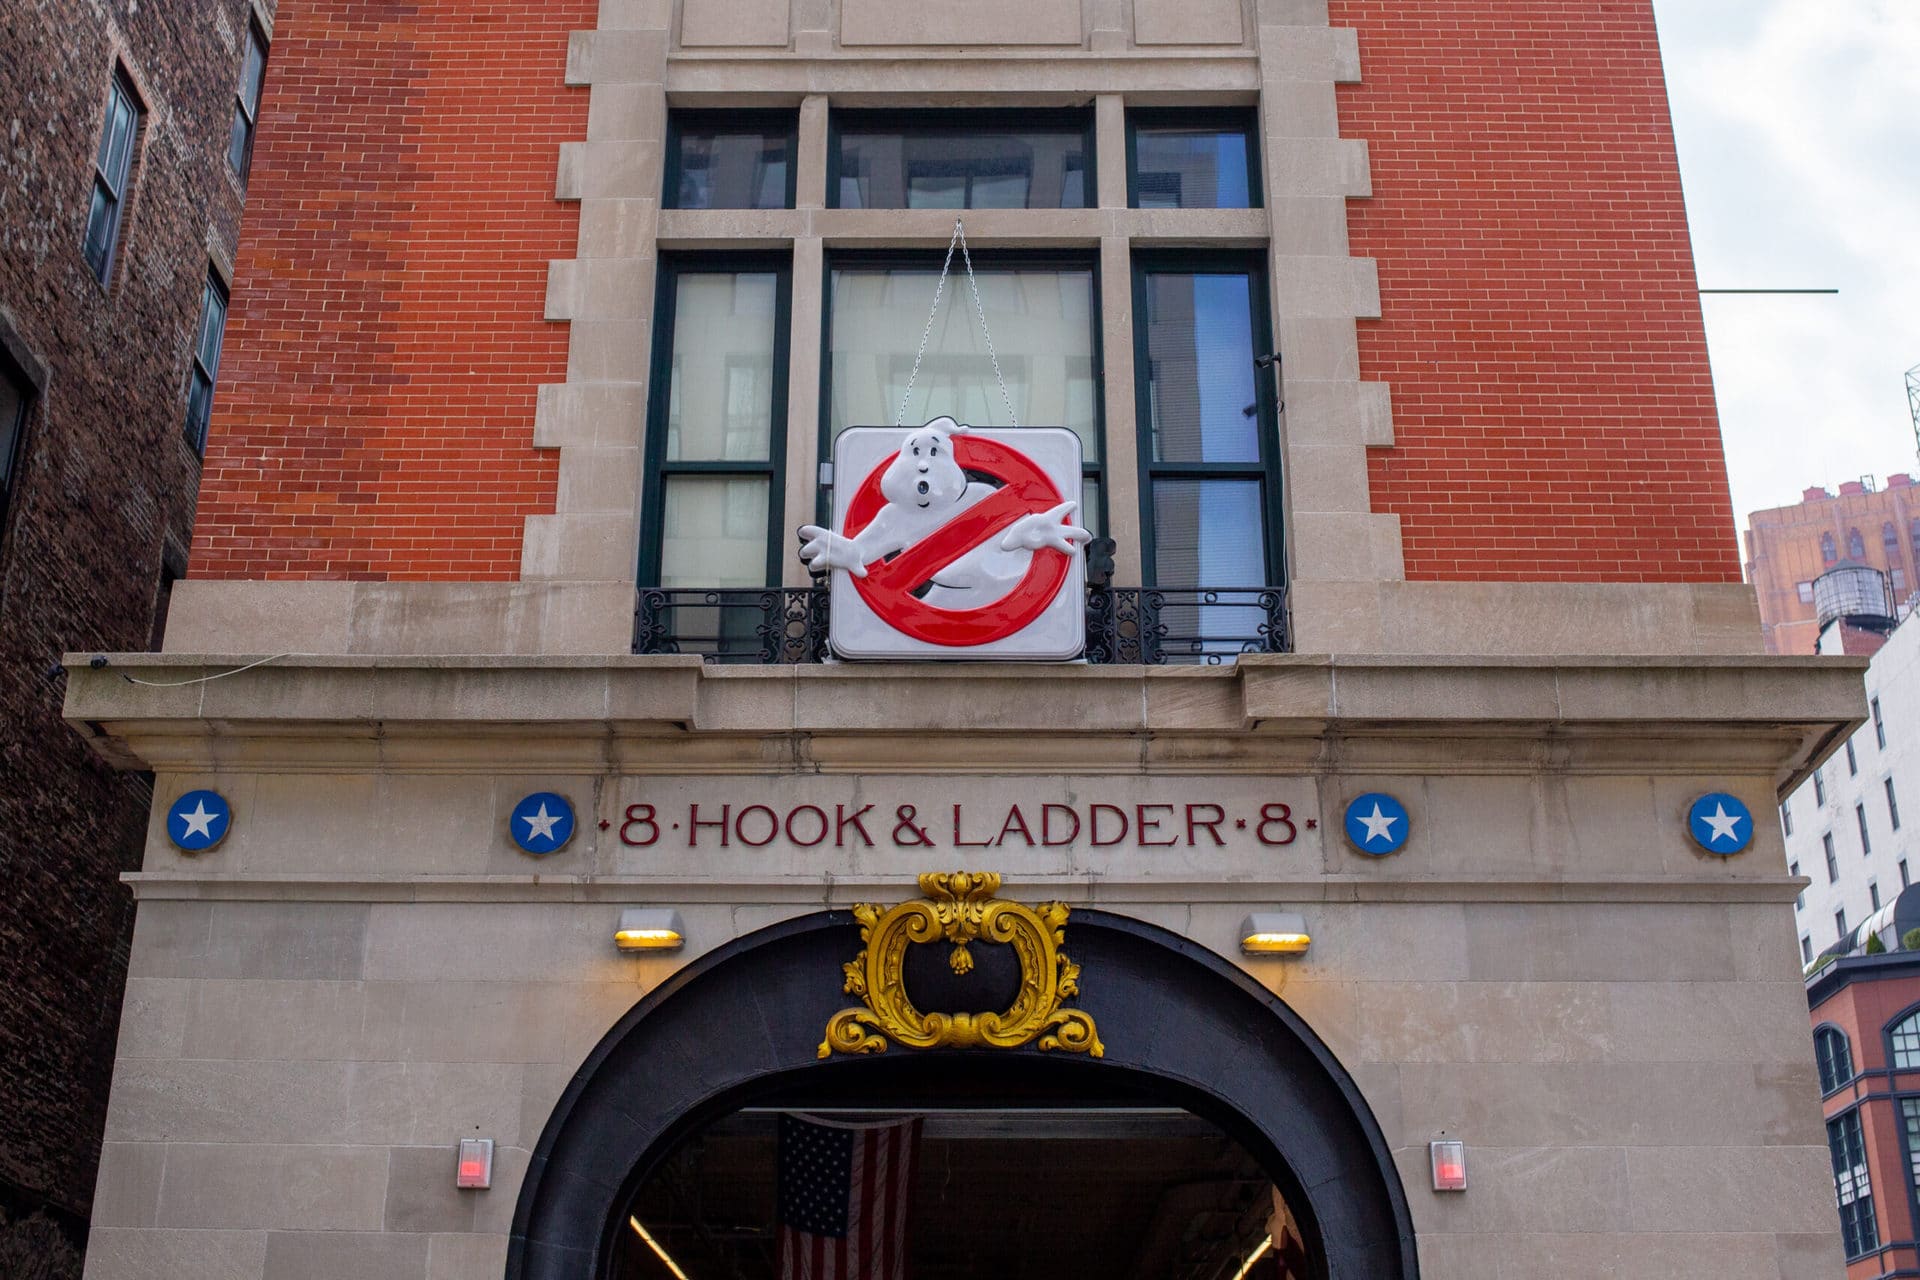 https://roadtrippers.com/wp-content/uploads/2022/03/ghostbusters-new-york-15-scaled.jpg